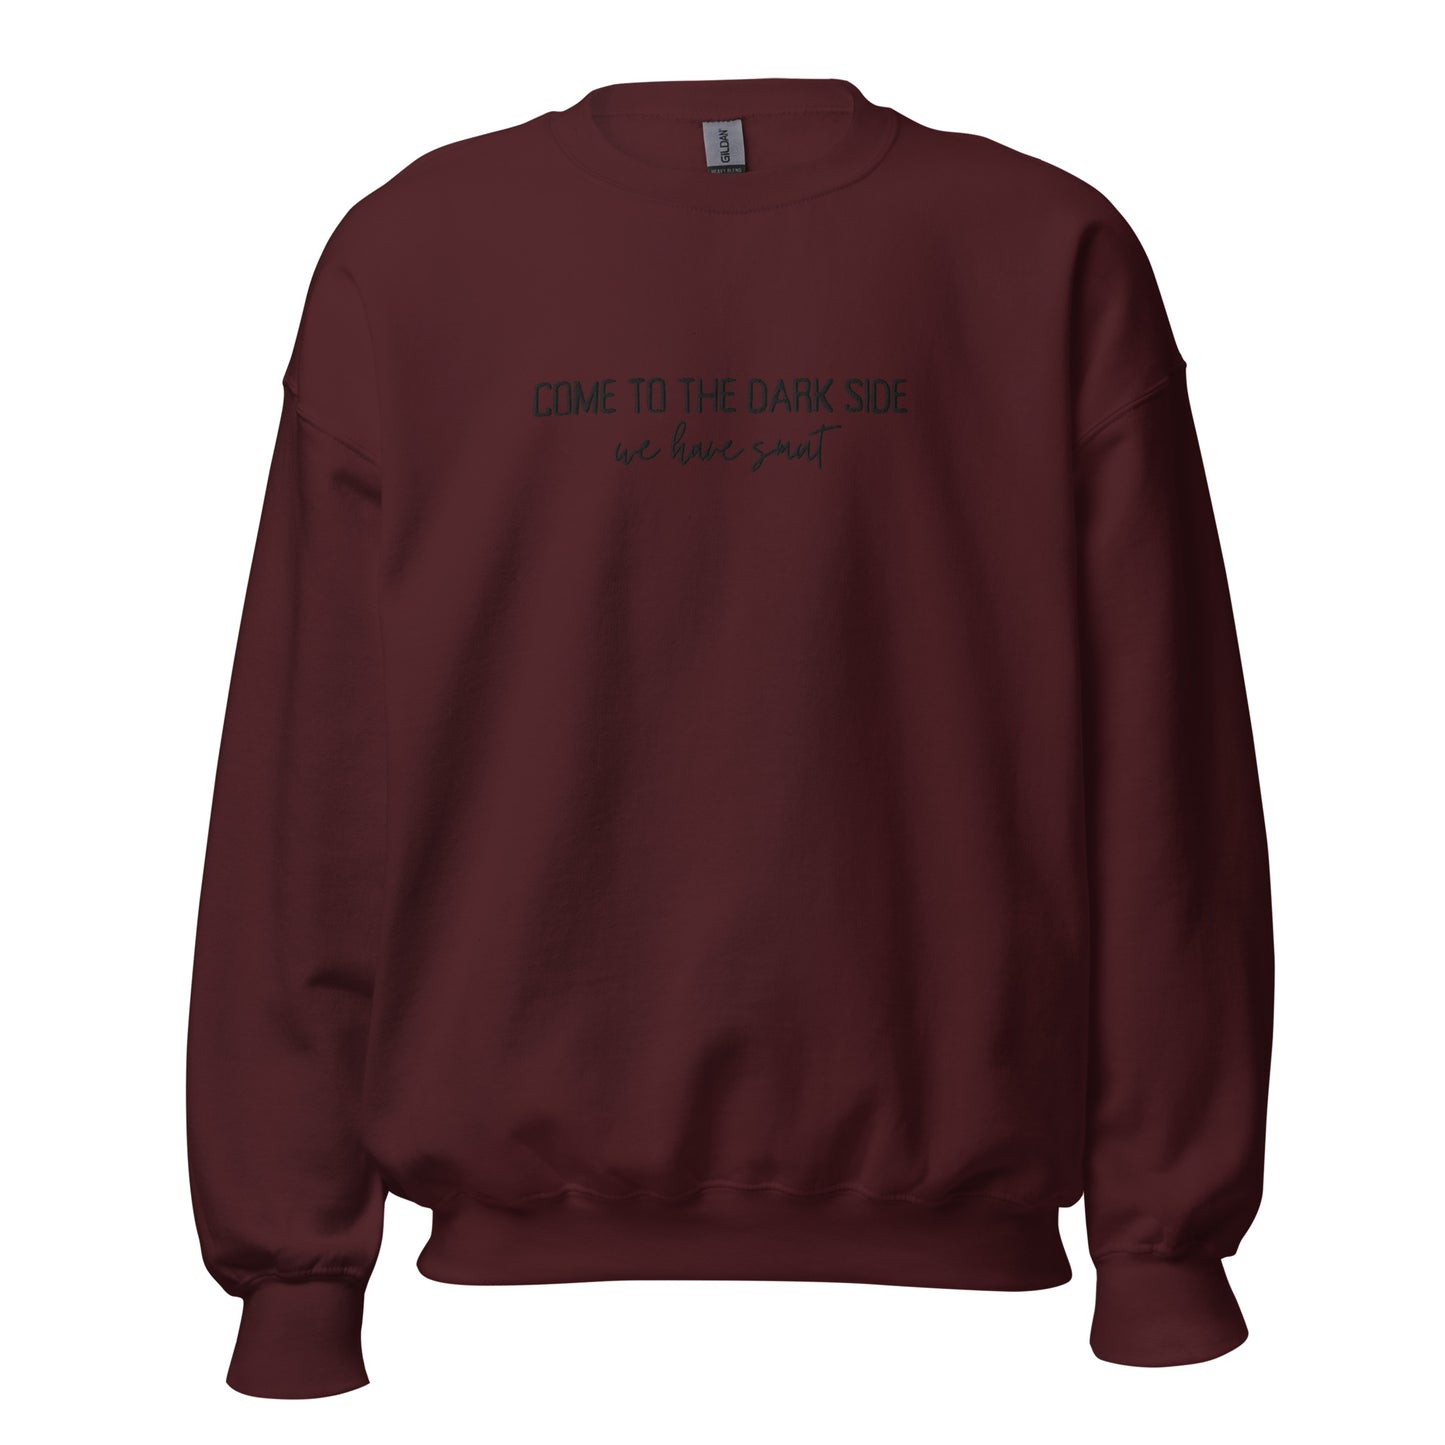 come to the dark side we have smut embroidered sweatshirt